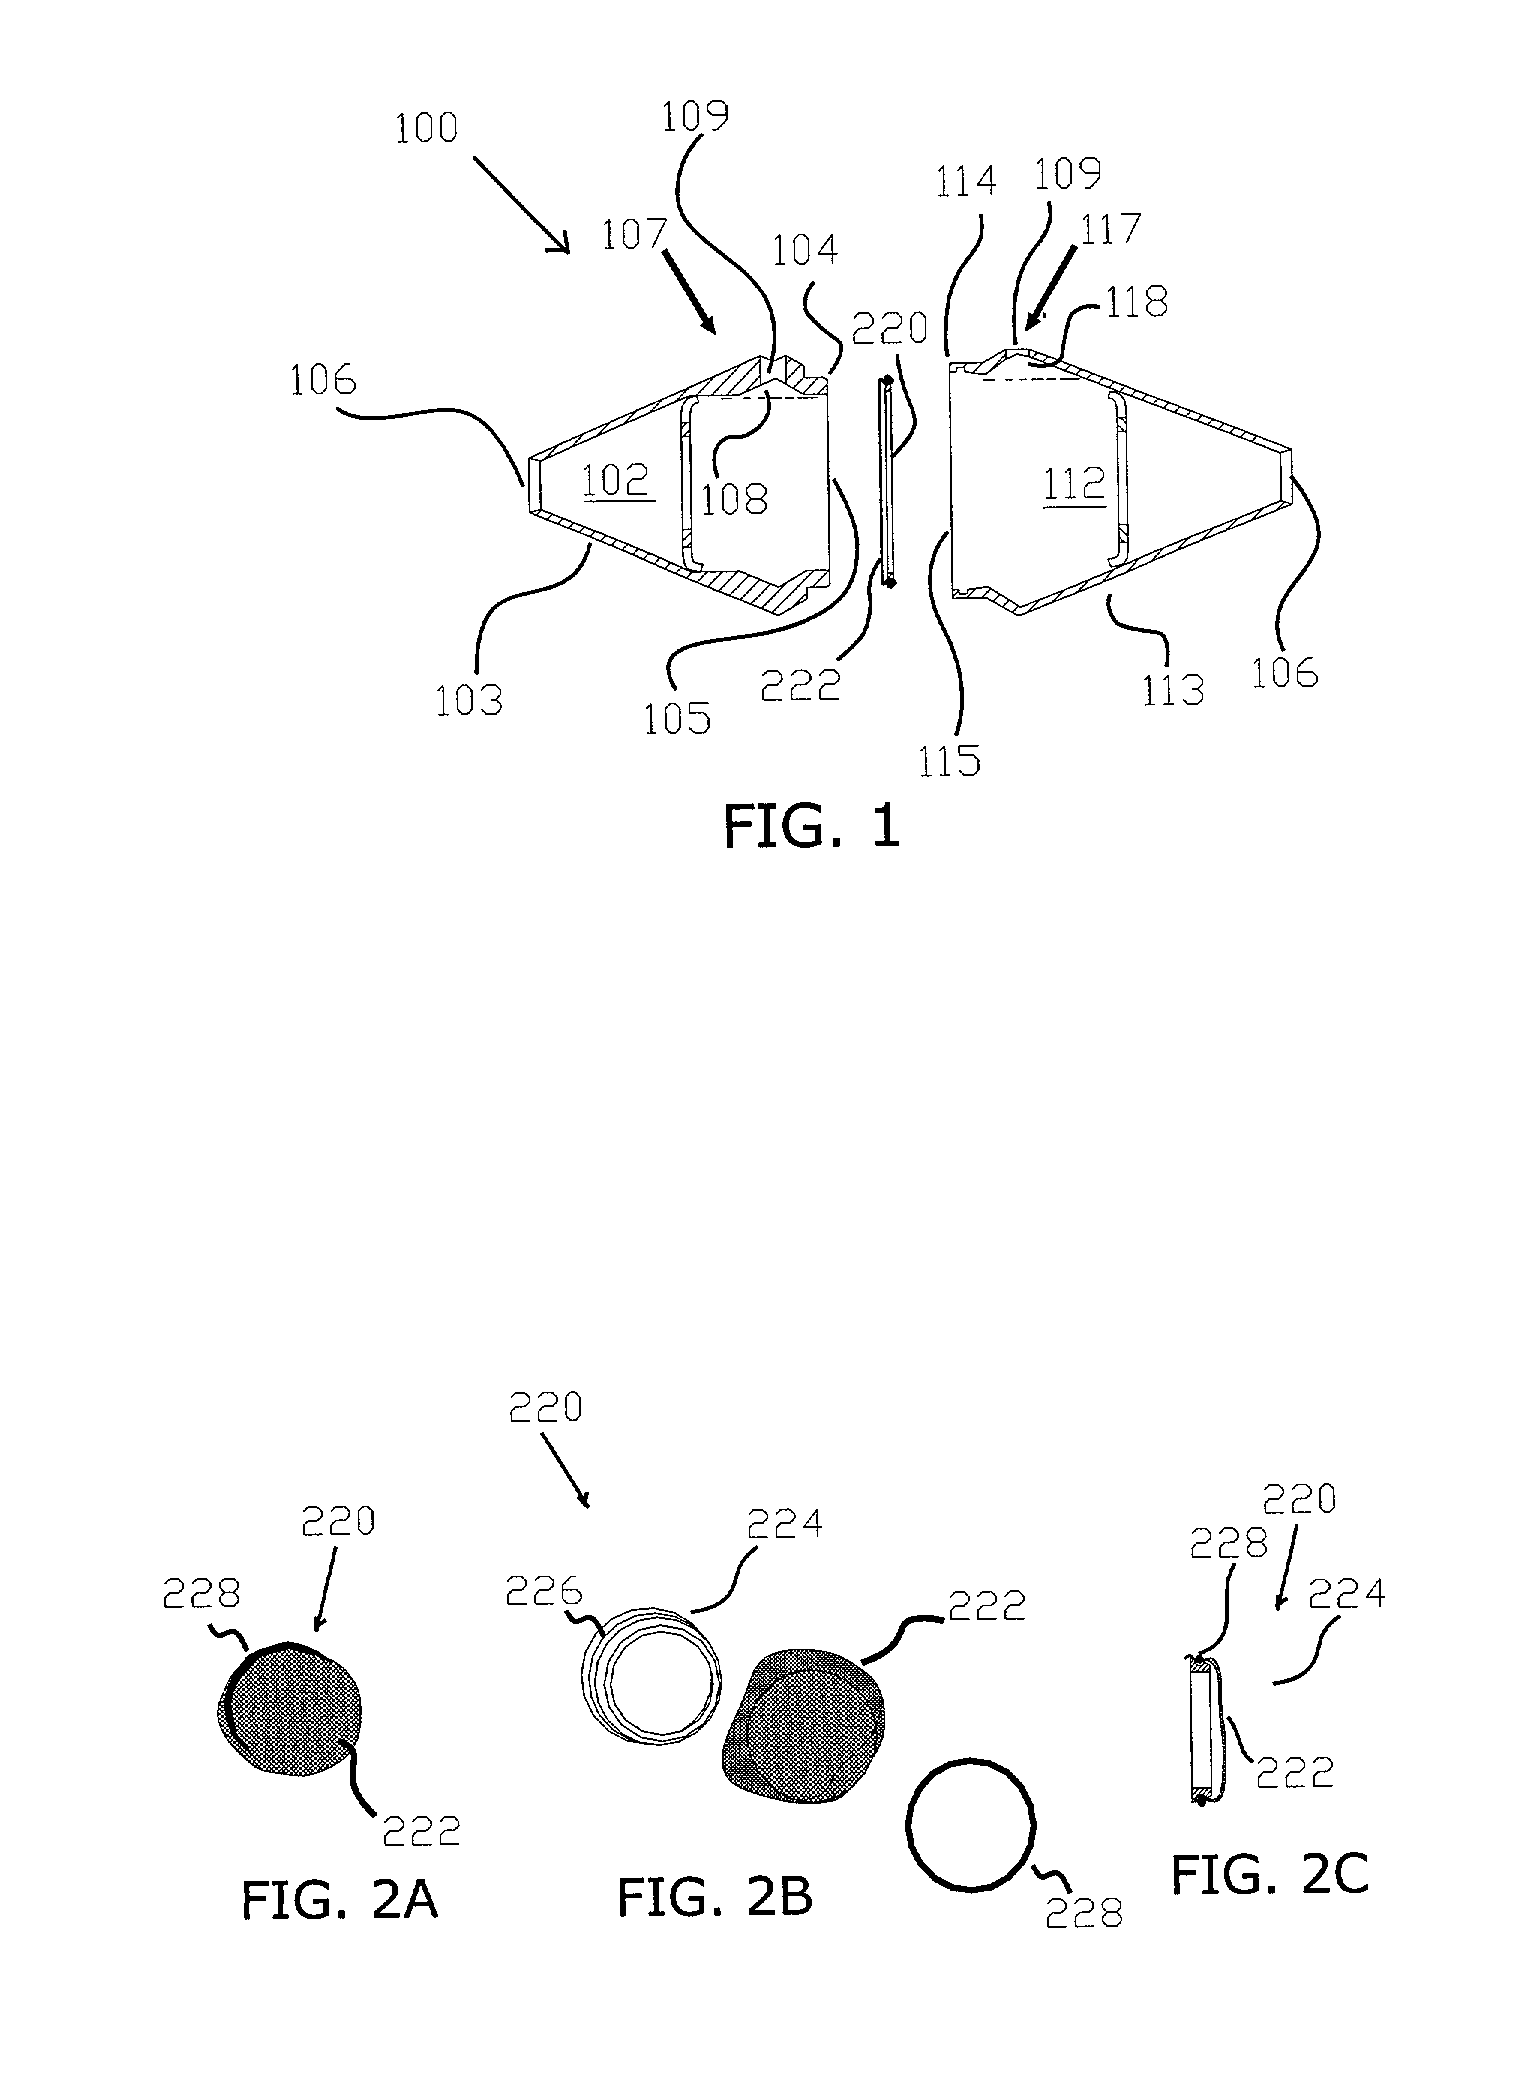 Apparatus and method for high throughput analysis of compound-membrane interactions